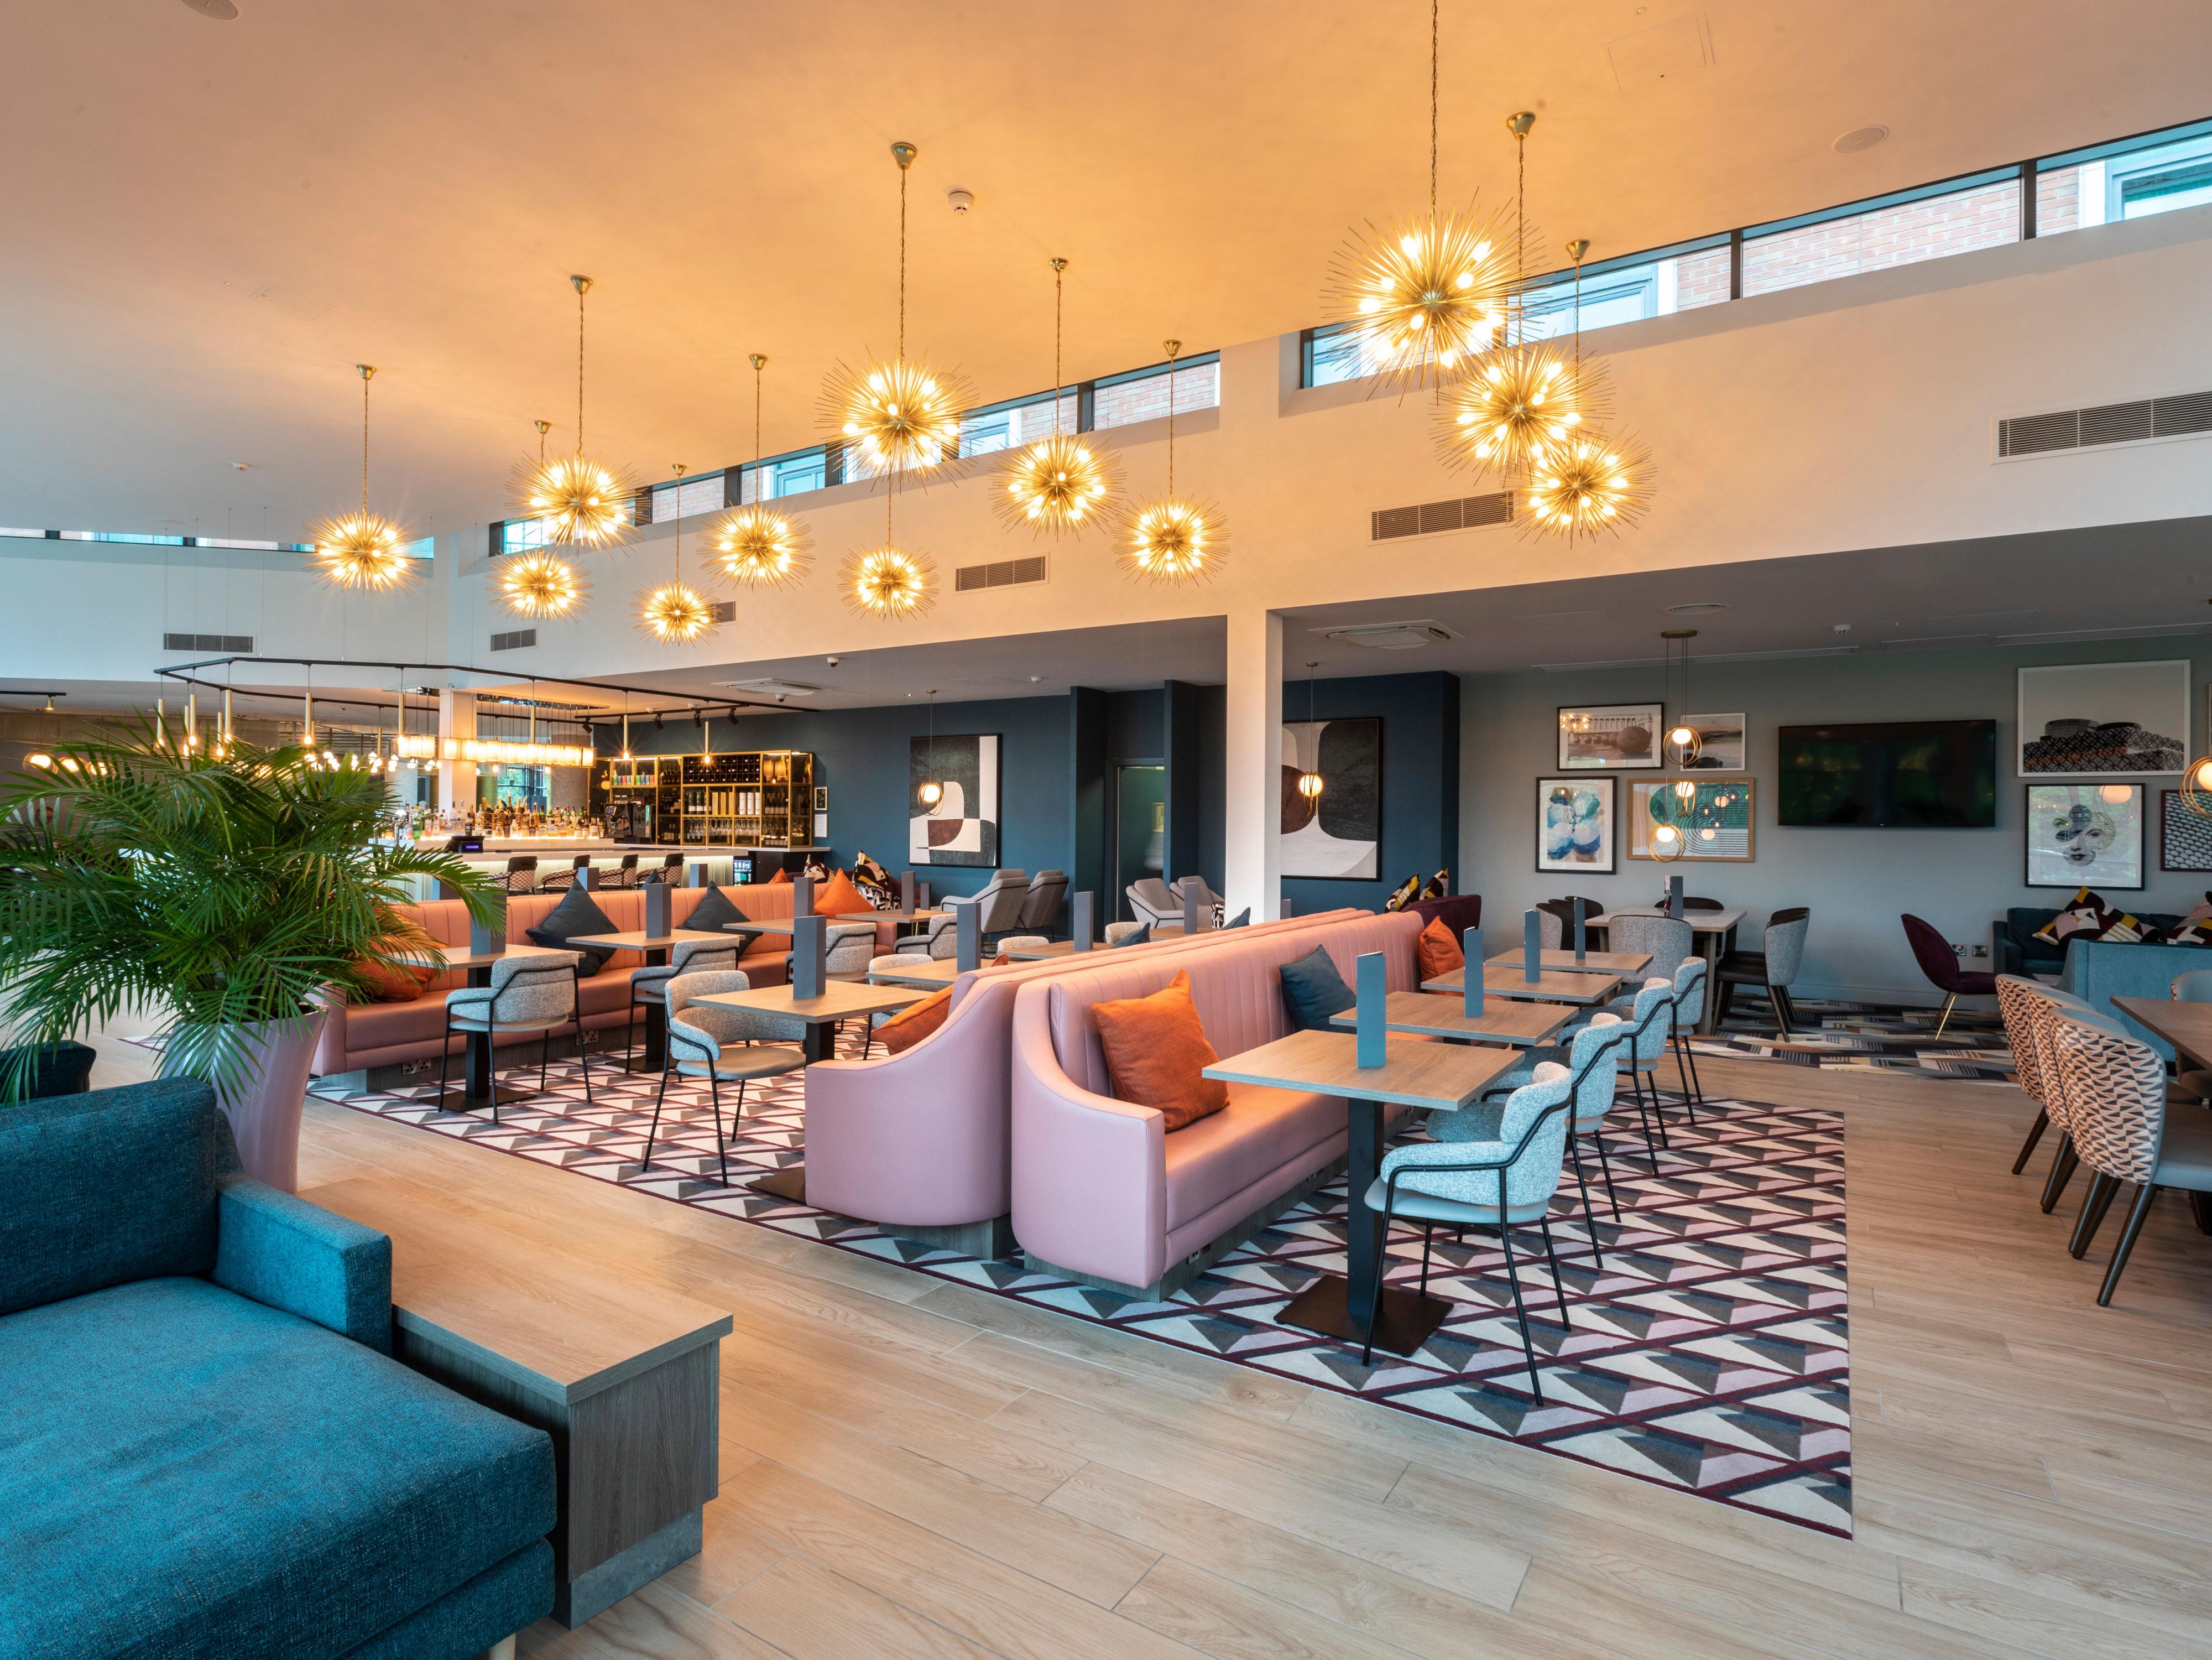 Just click on the link for a chance to visit Crowne Plaza Birmingham NEC virtually with a fully interactive, virtual tour. Move through the hotel exploring the bar, restaurant, meeting and event spaces and bedrooms.